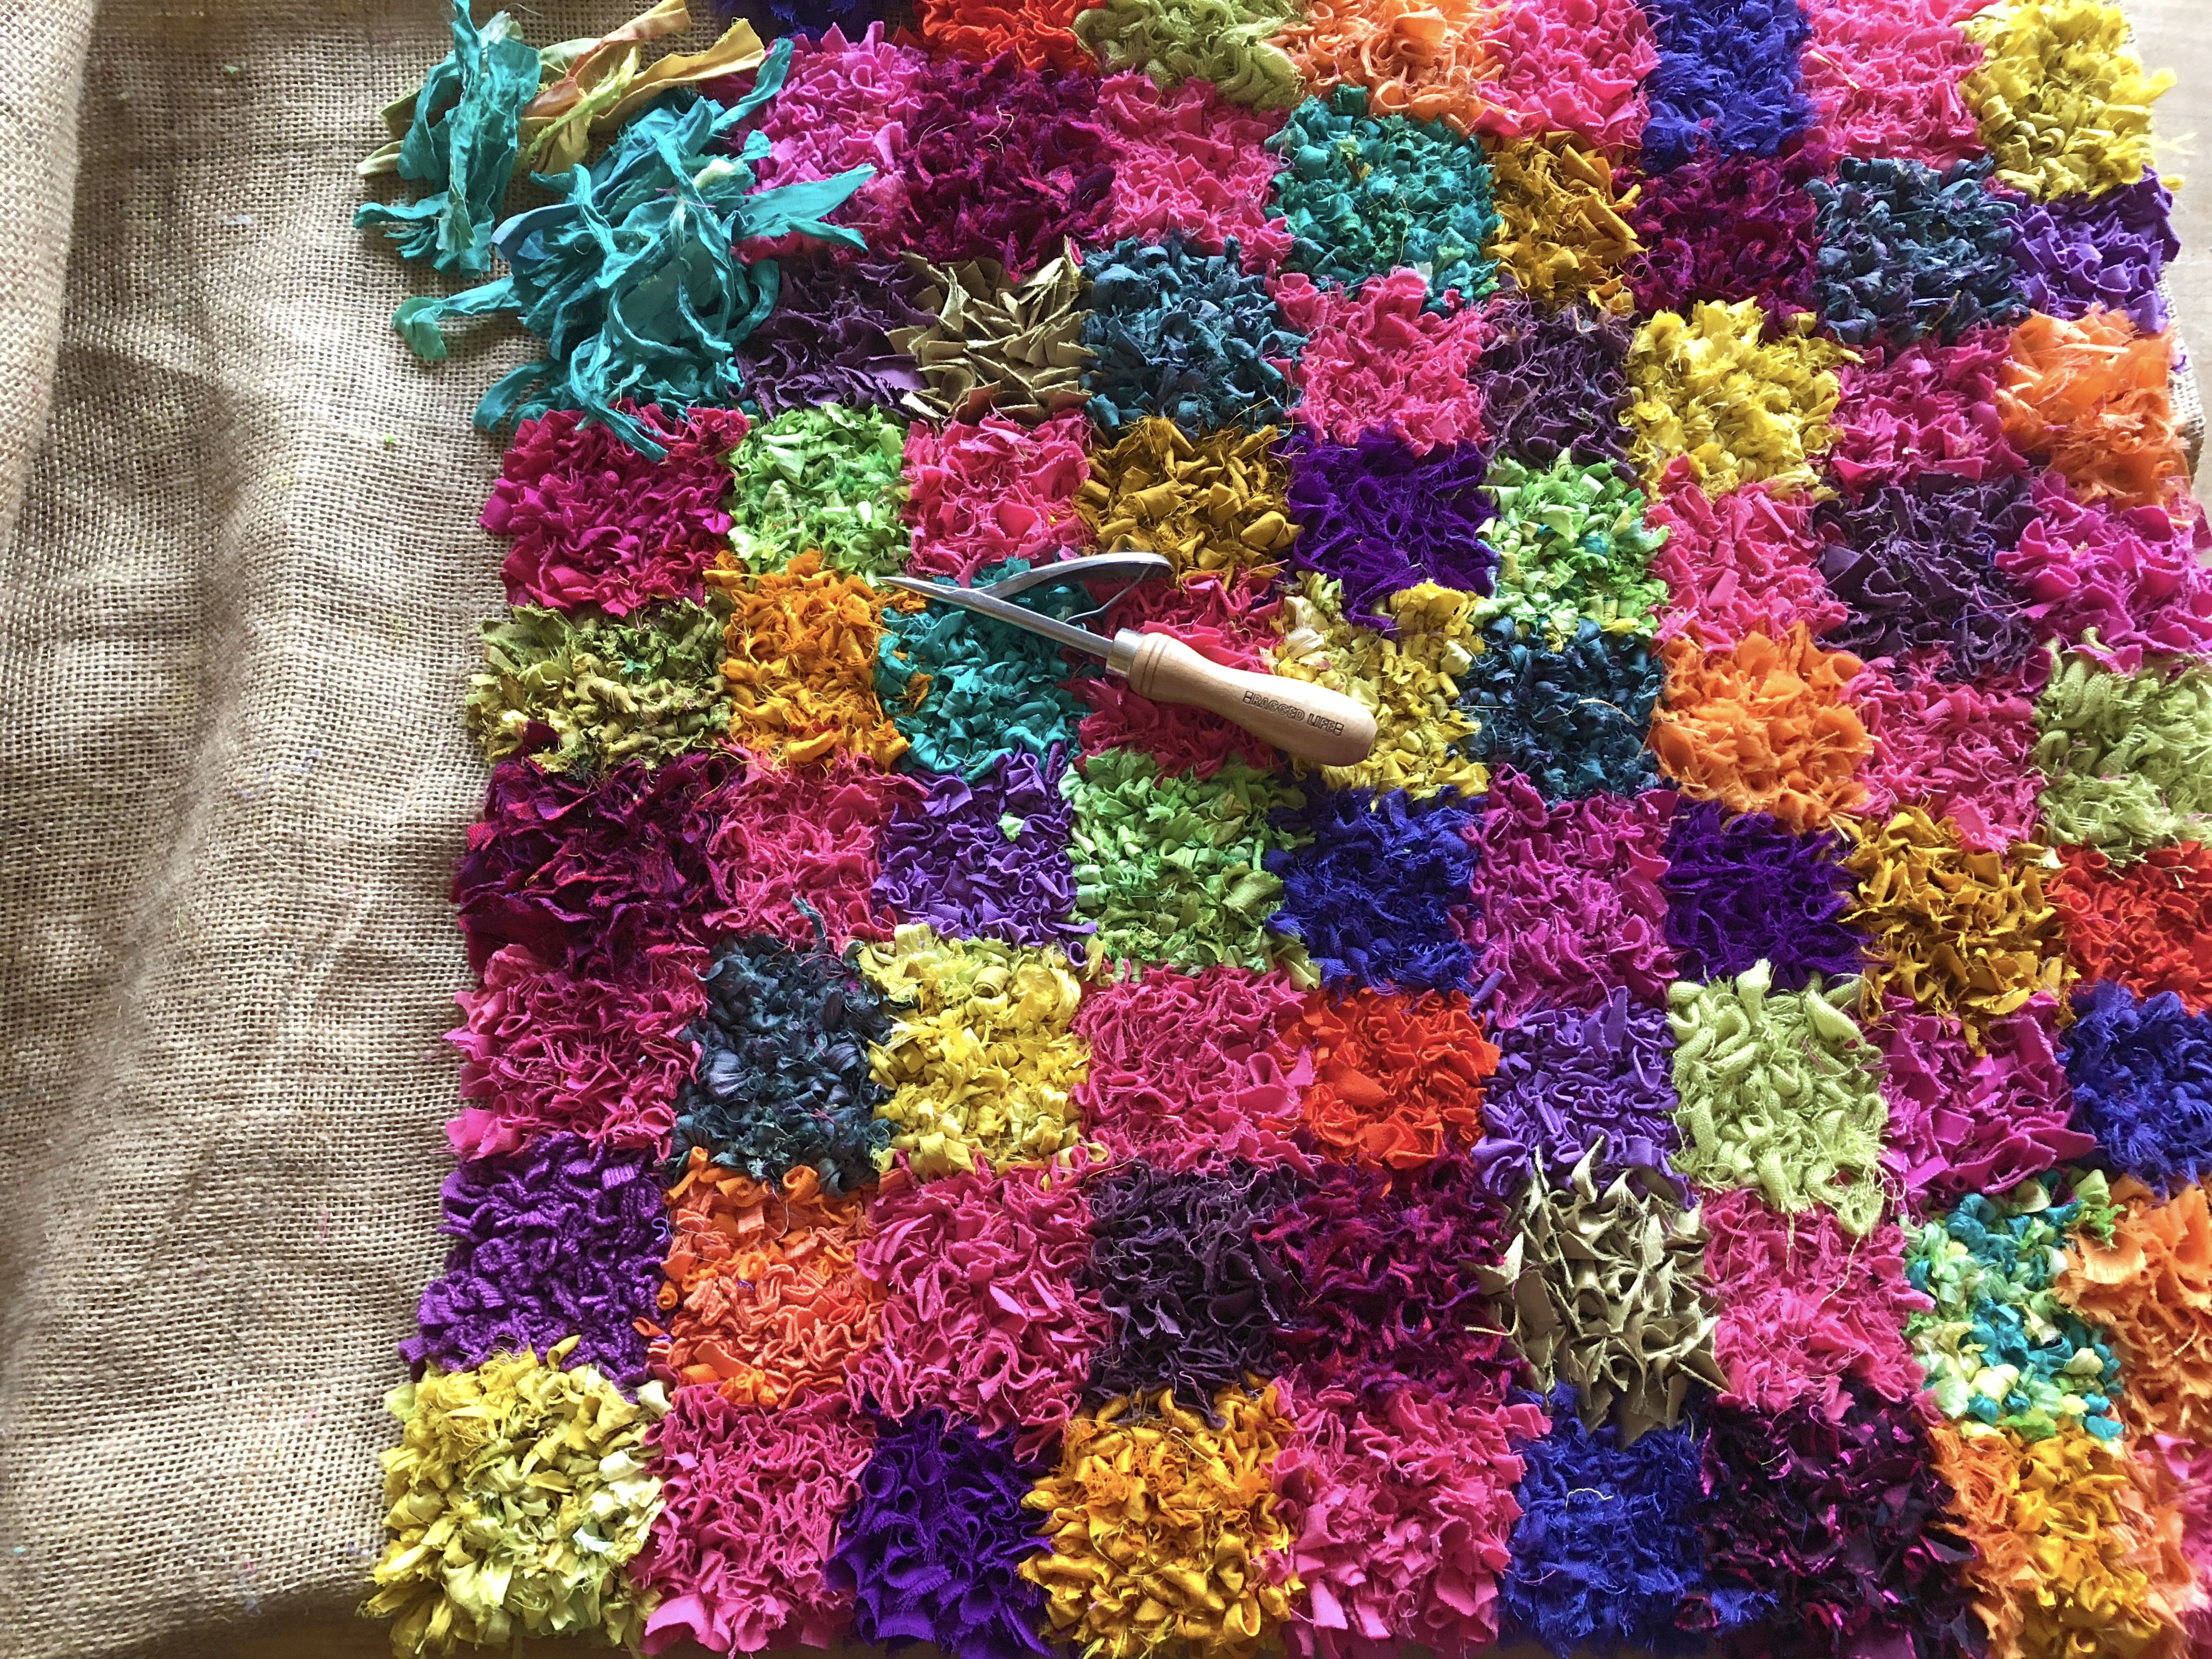 Partially made modern rag rug made using sari silk and recycled fabric in bright colours